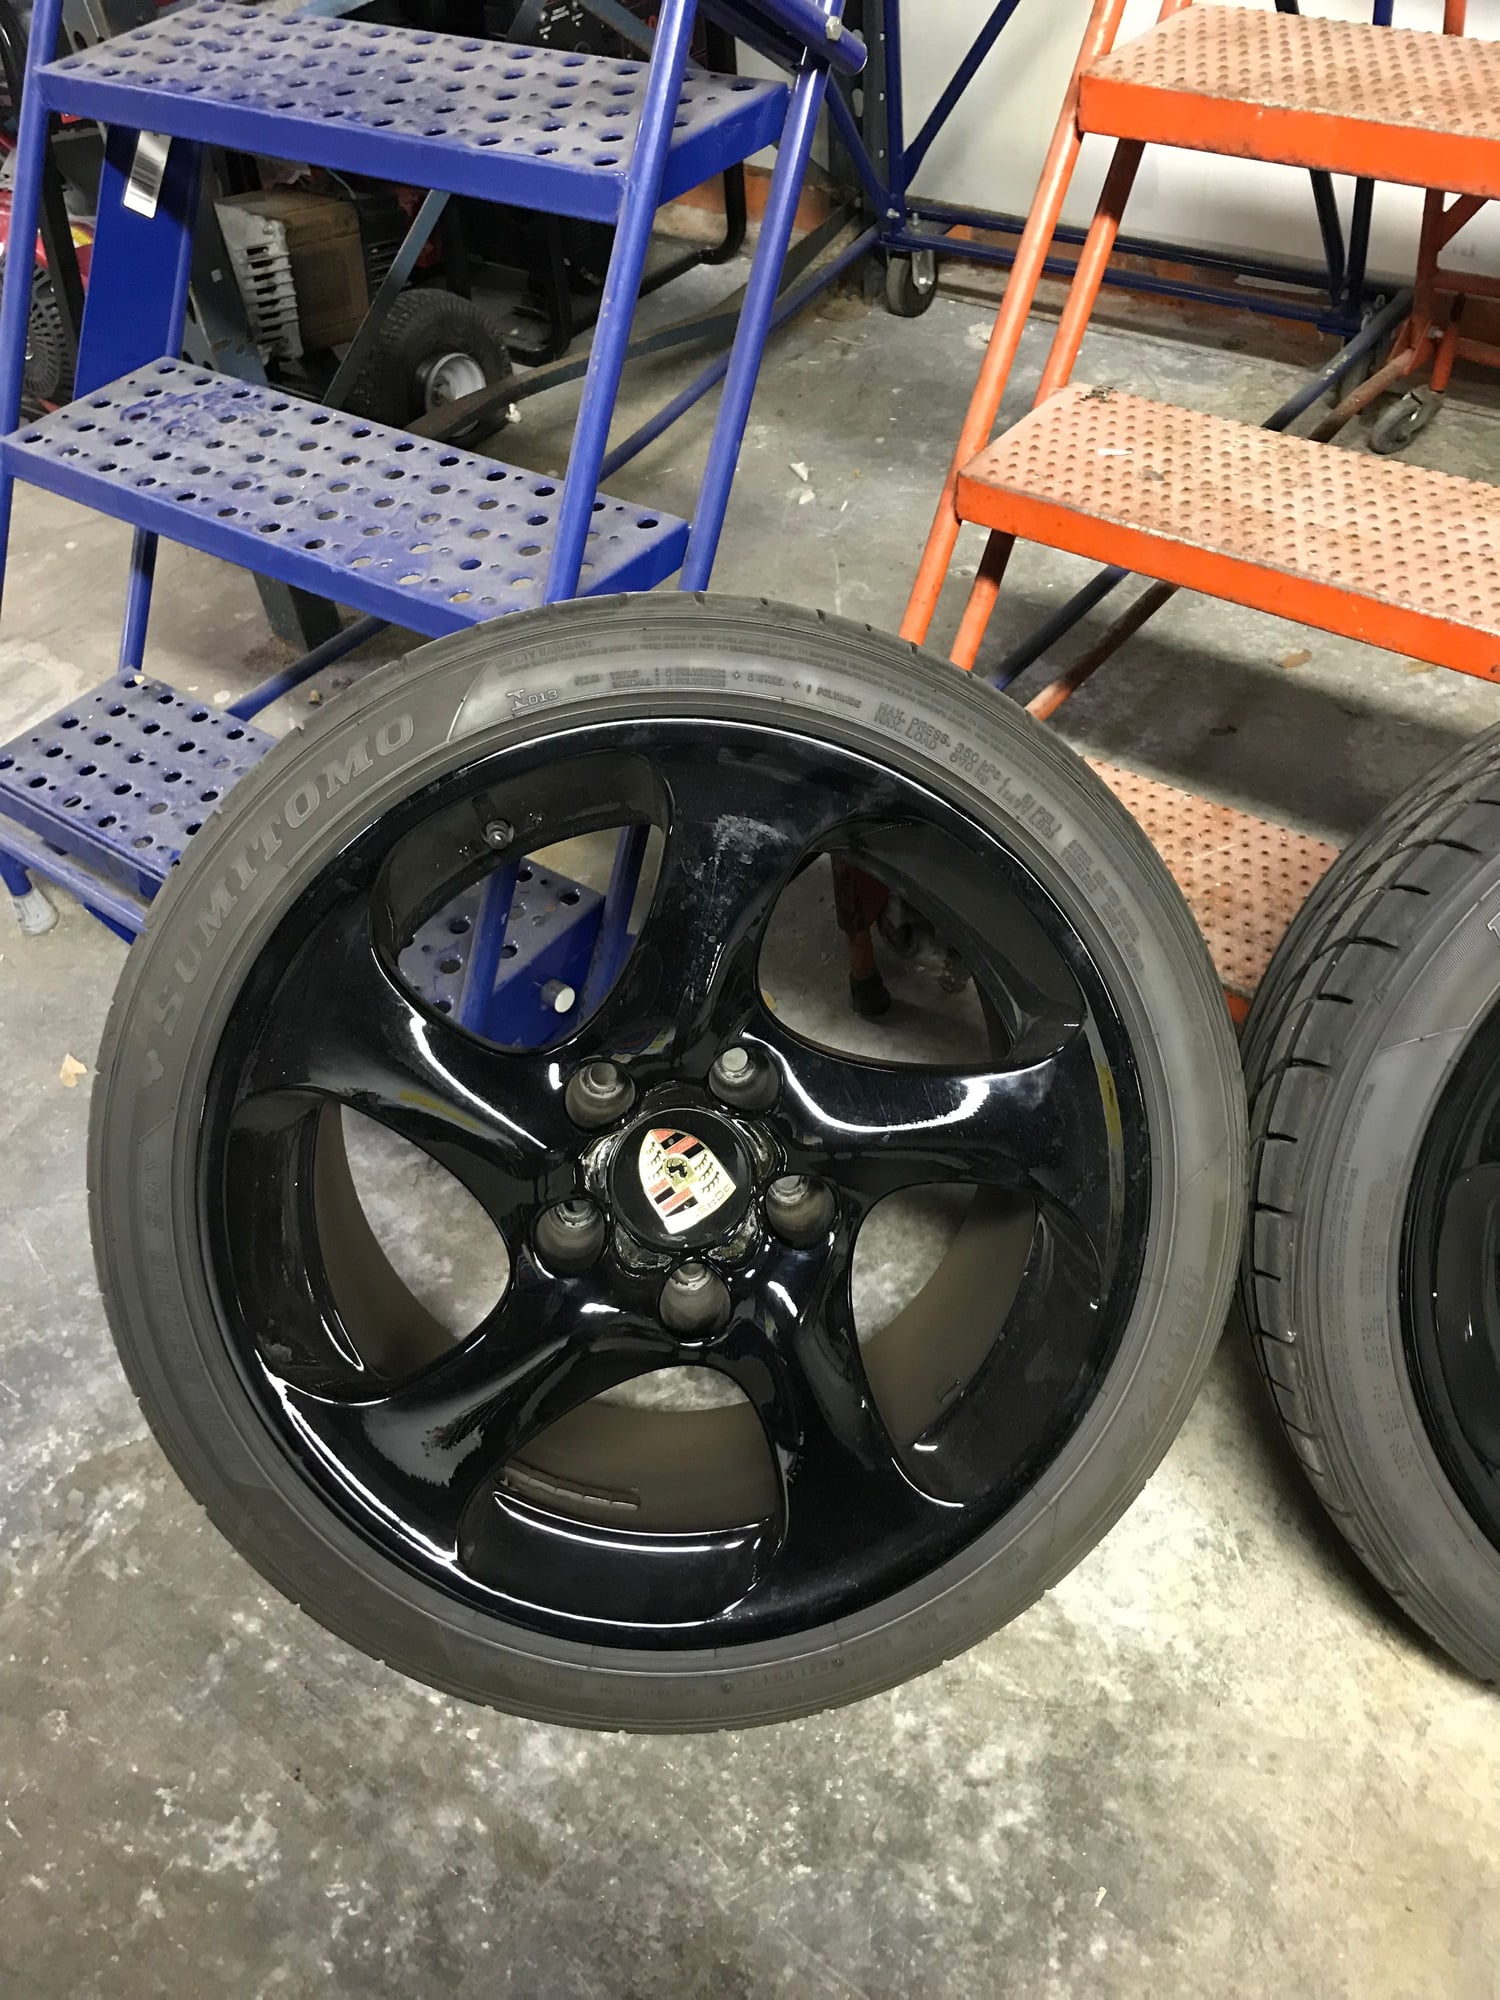 Wheels and Tires/Axles - Black Turbo Twist solid spoke wheels off 996 C4S with good Sumitomo tires - Used - 2002 to 2005 Porsche Carrera - Miami, FL 33169, United States